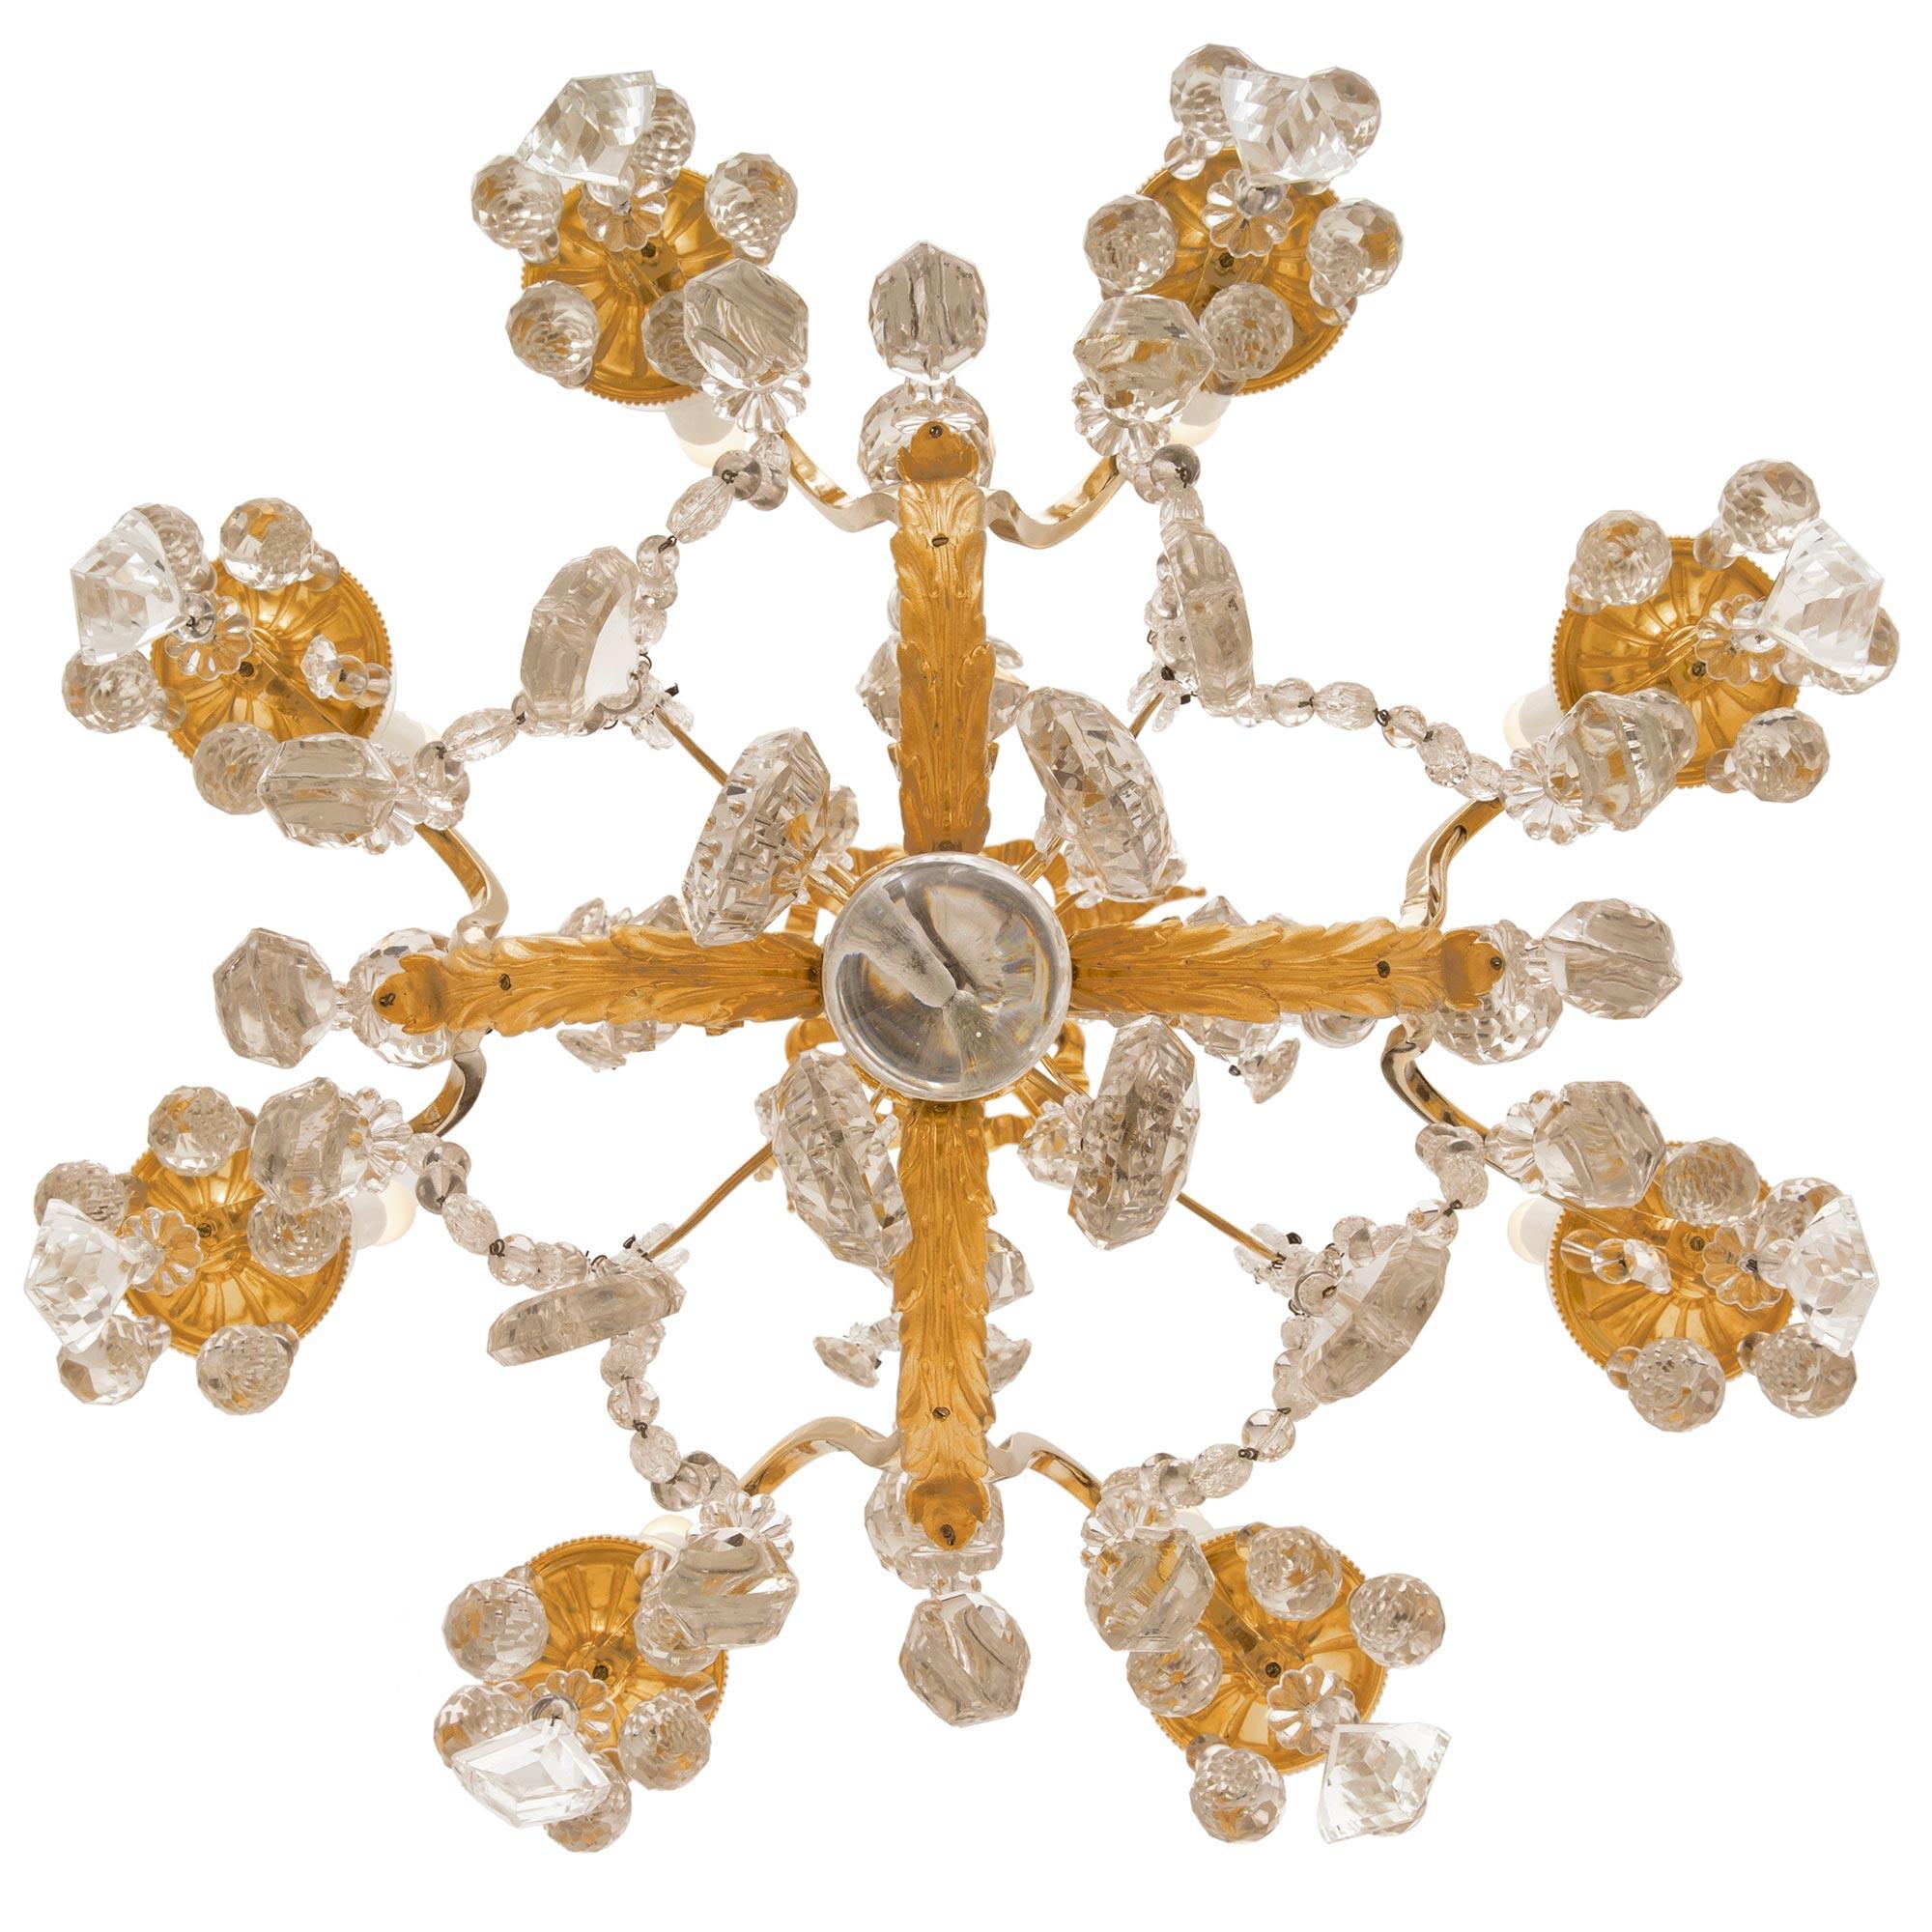 An exceptional and unique French 19th century Louis XVI st. ormolu and Baccarat crystal chandelier. The eight arm chandelier is centered by a beautiful solid crystal ball pendant below a fine foliate ormolu finial surrounded by lovely faceted cut